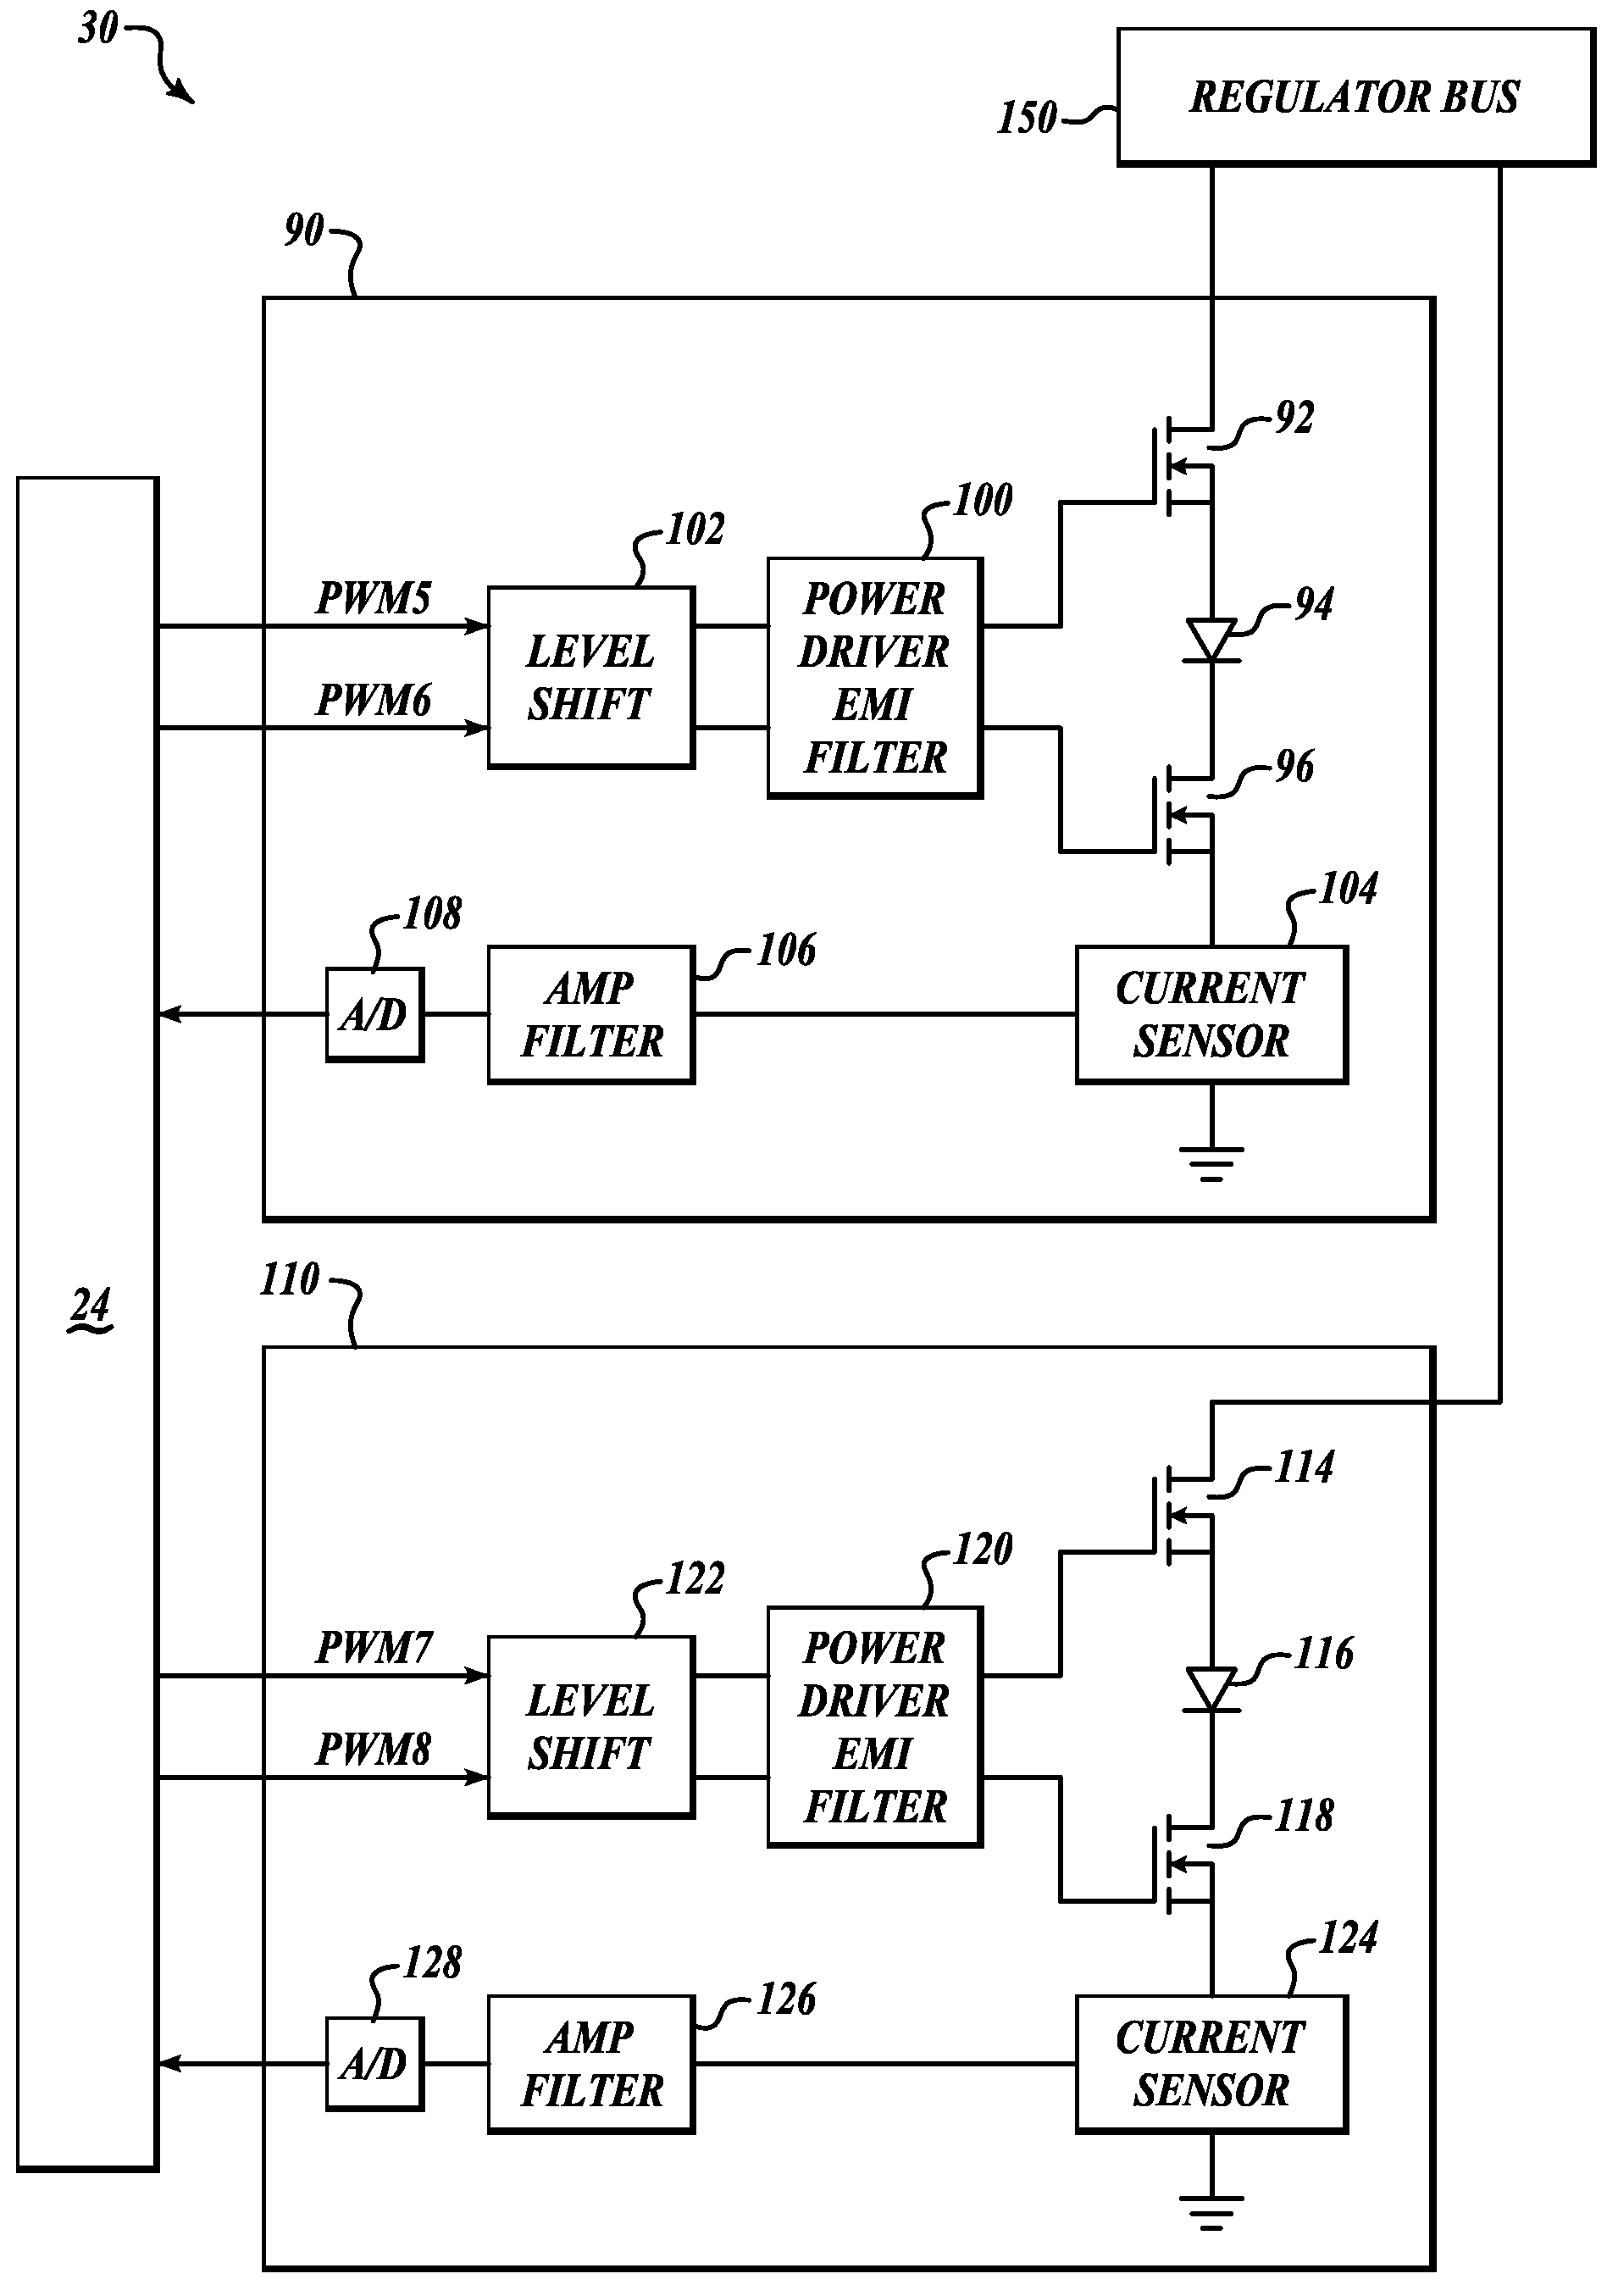 Dual mode searchlight dimming controller systems and methods